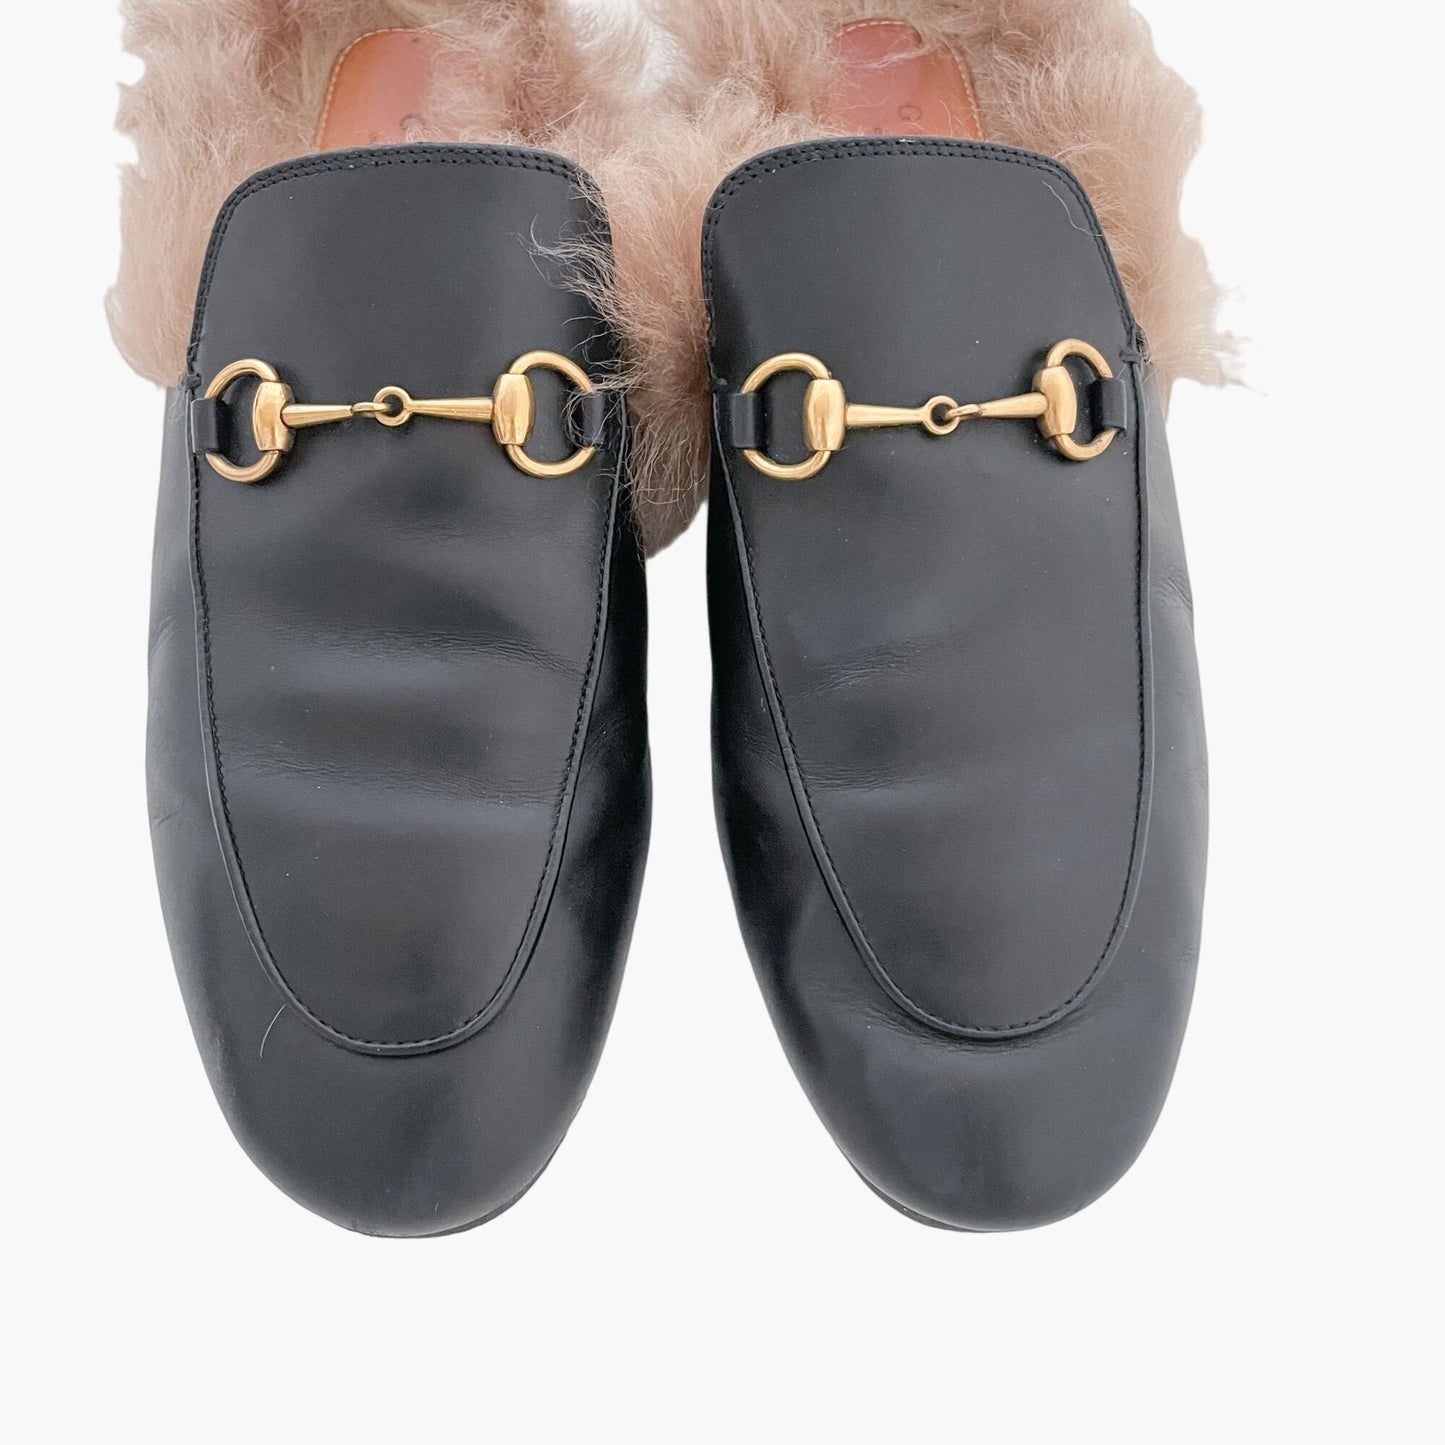 Gucci Princetown Fur-Lined Horsebit Slippers in Black Leather Size 38